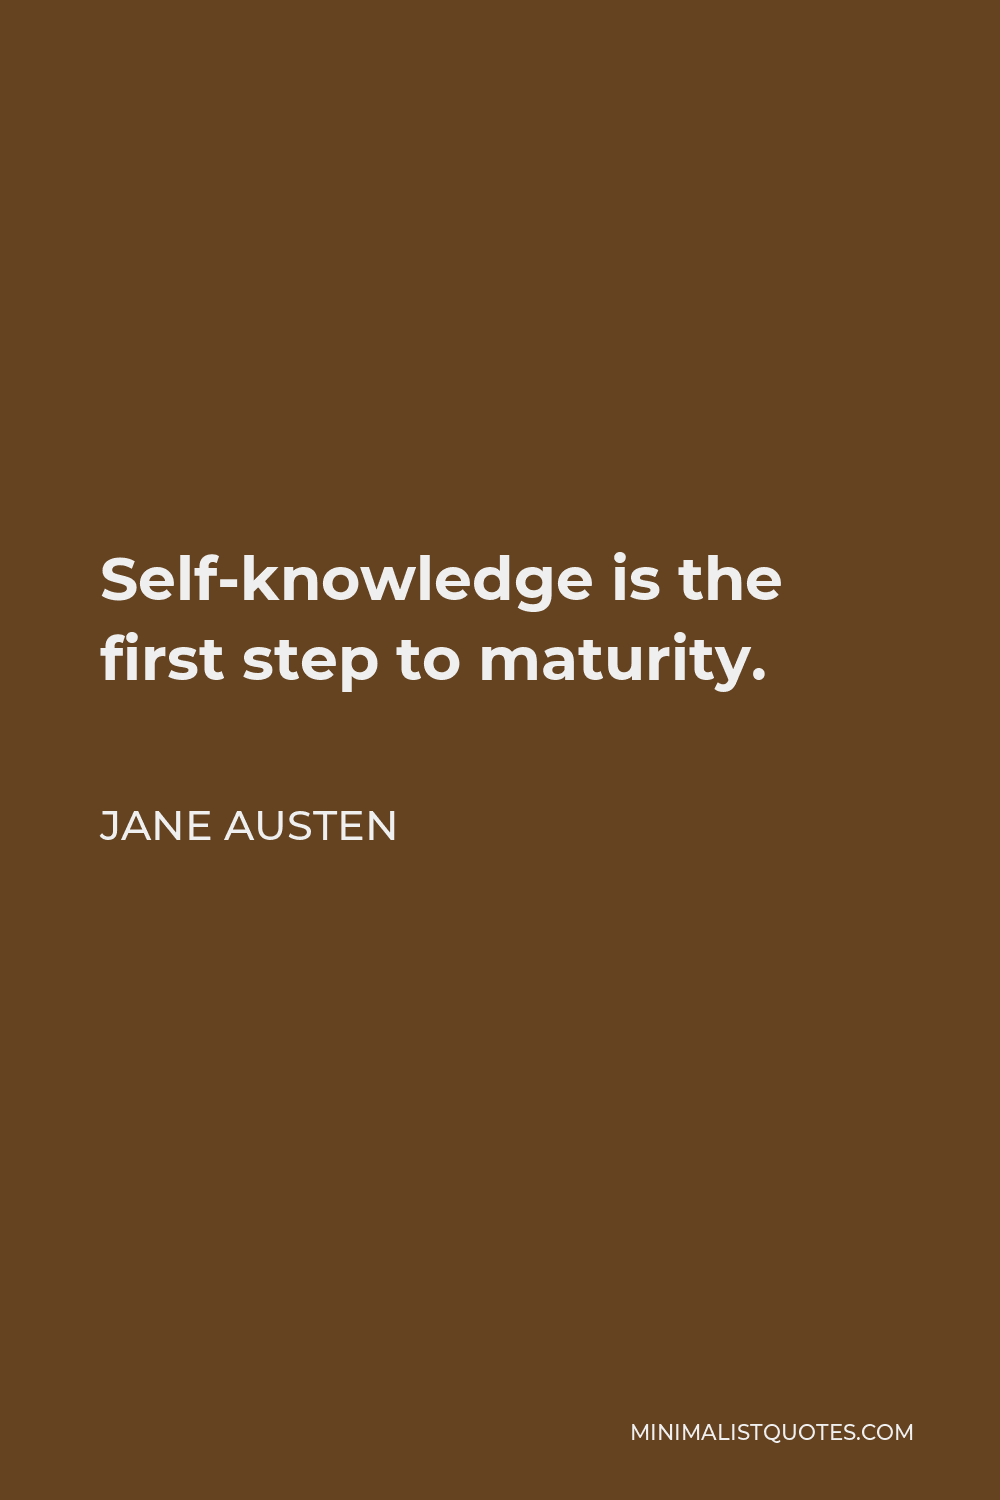 Jane Austen Quote - Self-knowledge is the first step to maturity.